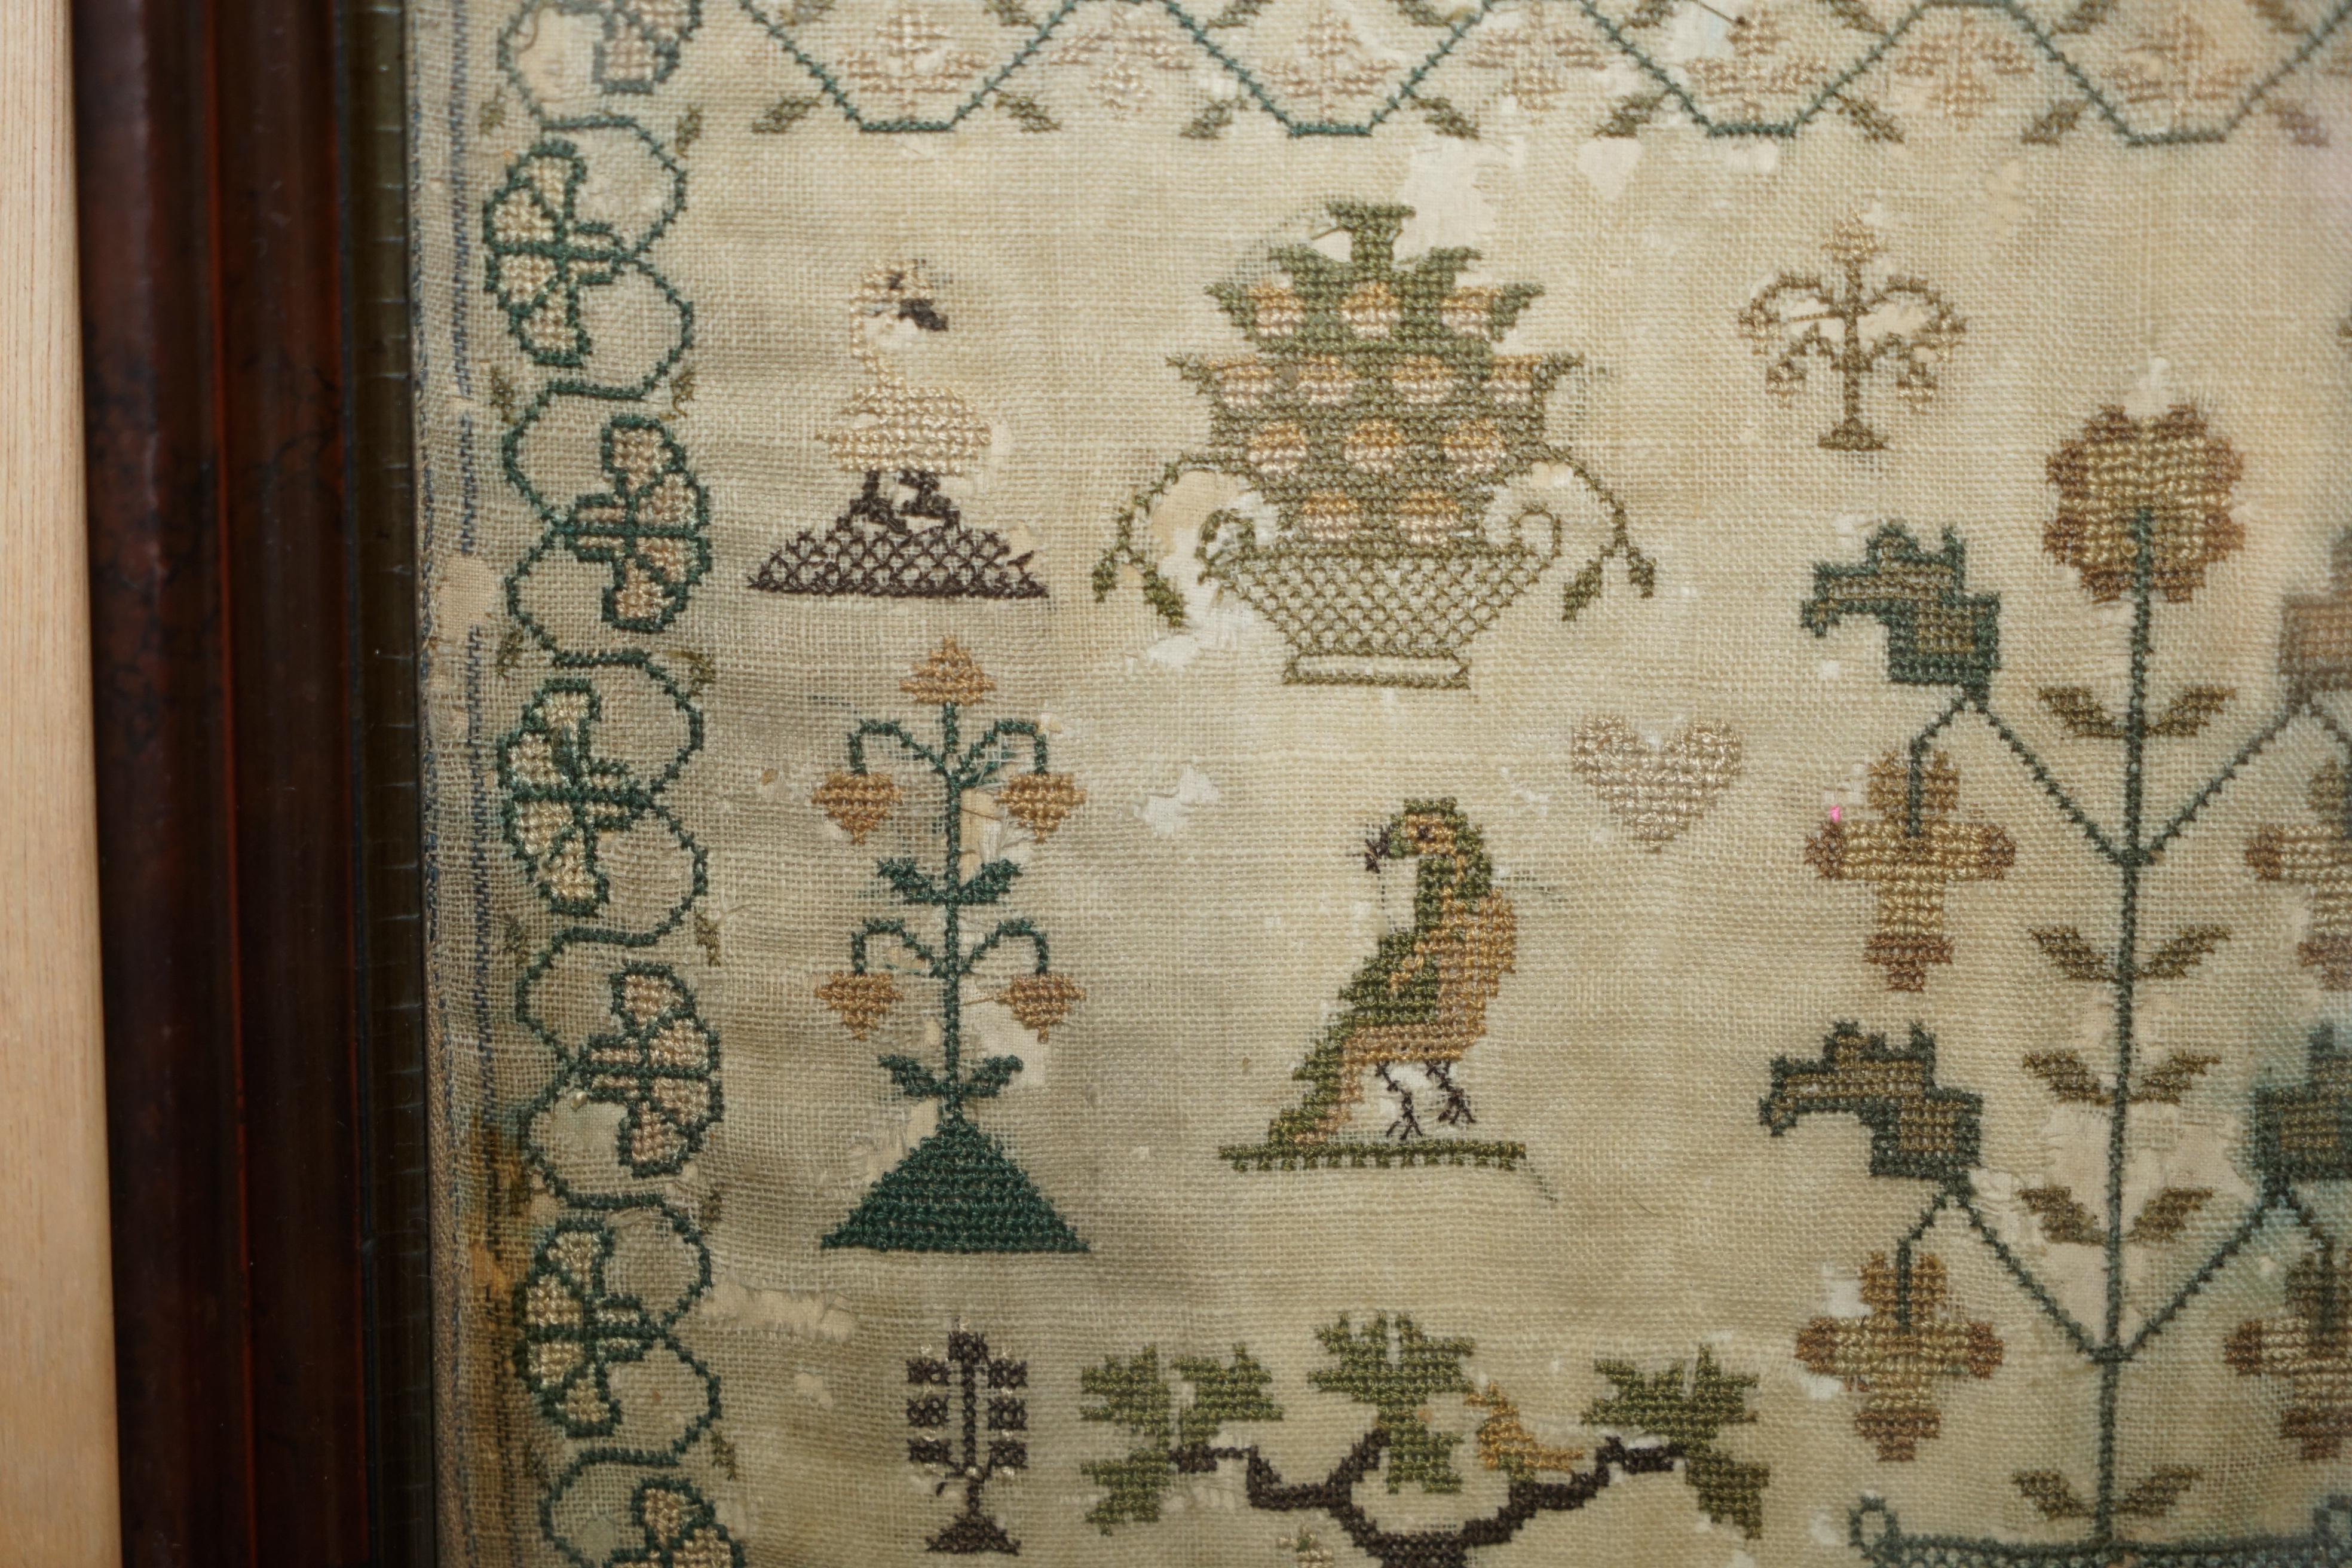 ANTIQUE 1838 ORIGINAL EARLY ViCTORIAN NEEDLEWORK SAMPLER IN THE PERIOD FRAME For Sale 1